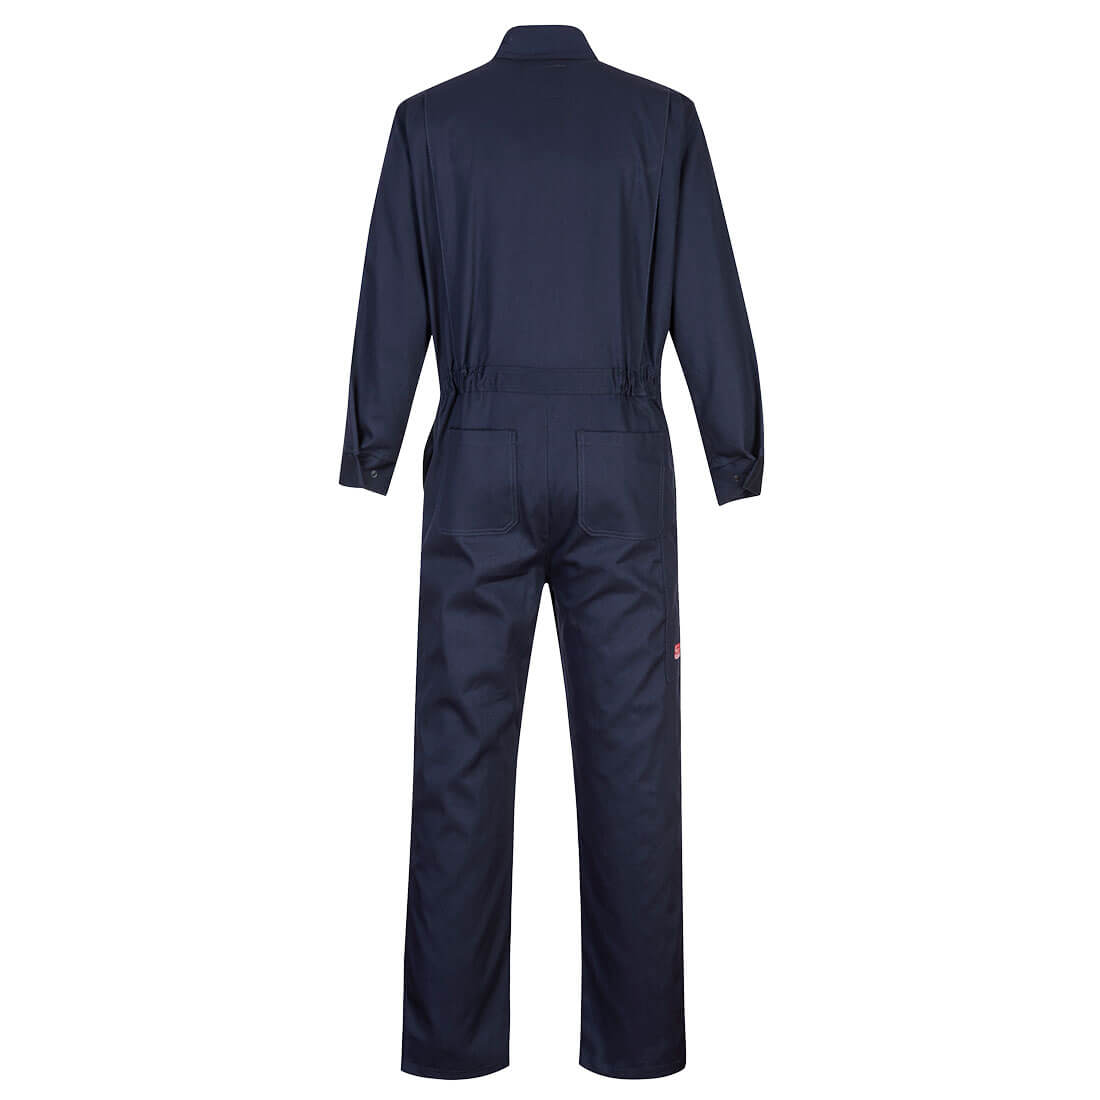 UFR88 Portwest® Bizflame® 88/12 Flame-Resistant ARC2 Coveralls - Navy